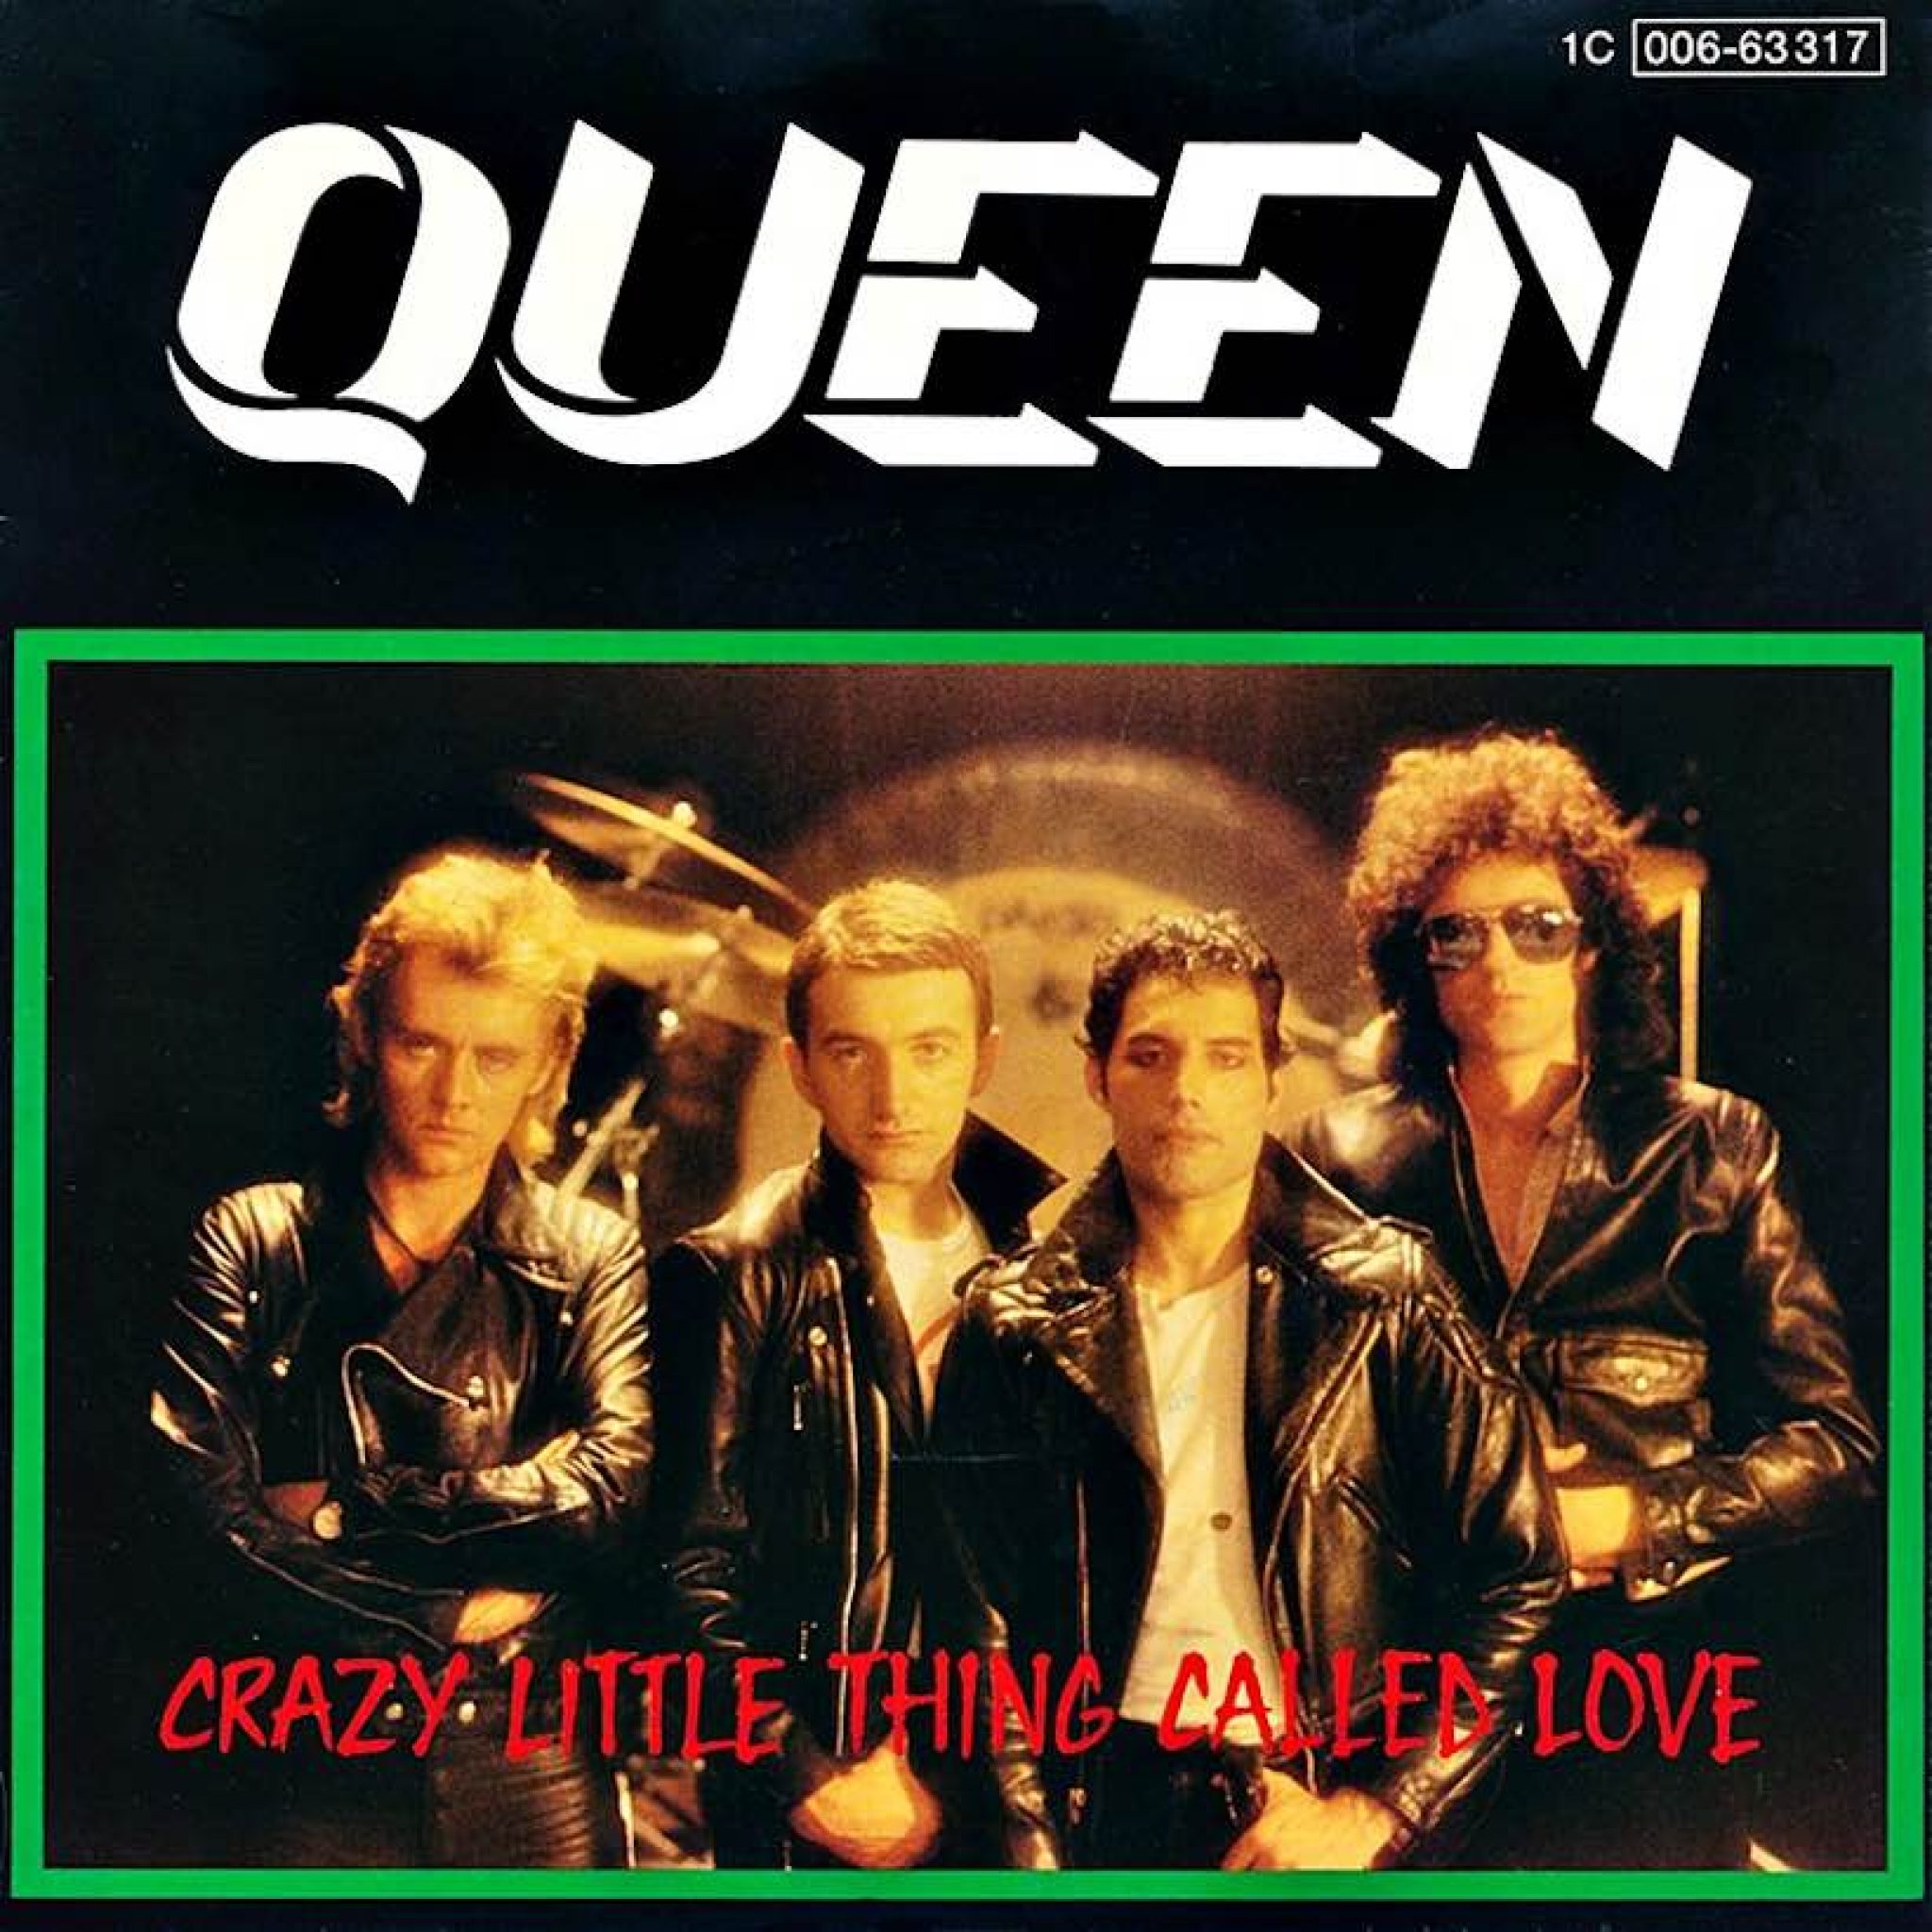 Queen thing called love. Фредди Меркьюри Crazy little thing Called Love. Crazy little thing Called Love обложка. Crazy little thing Called Love Queen Single. Queen группа 1980 Crazy little thing Called Love Queen.